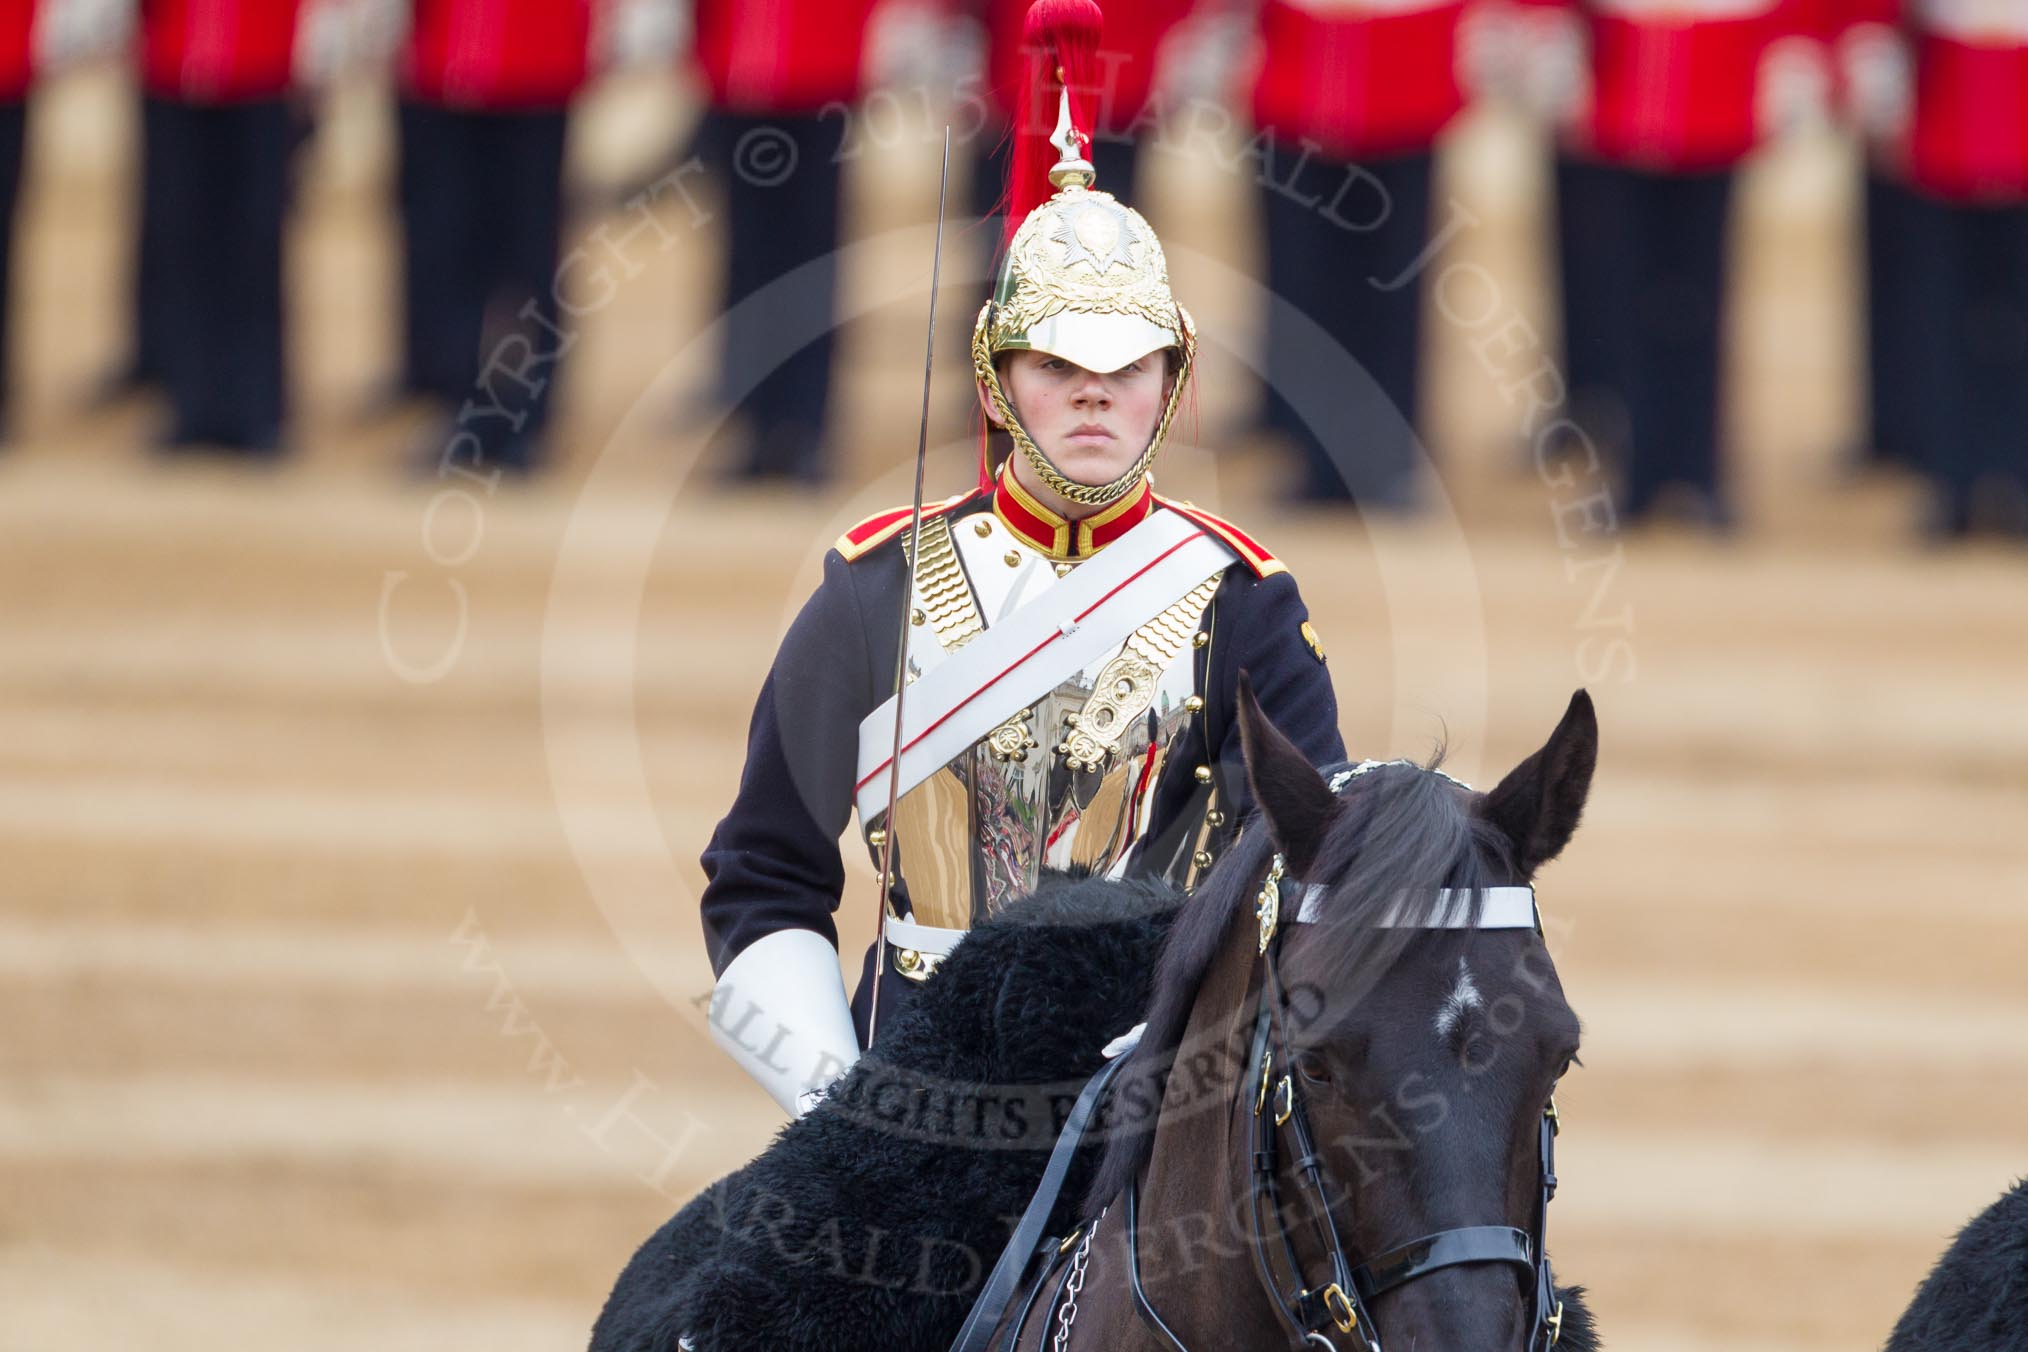 The Colonel's Review 2016.
Horse Guards Parade, Westminster,
London,

United Kingdom,
on 04 June 2016 at 11:05, image #204